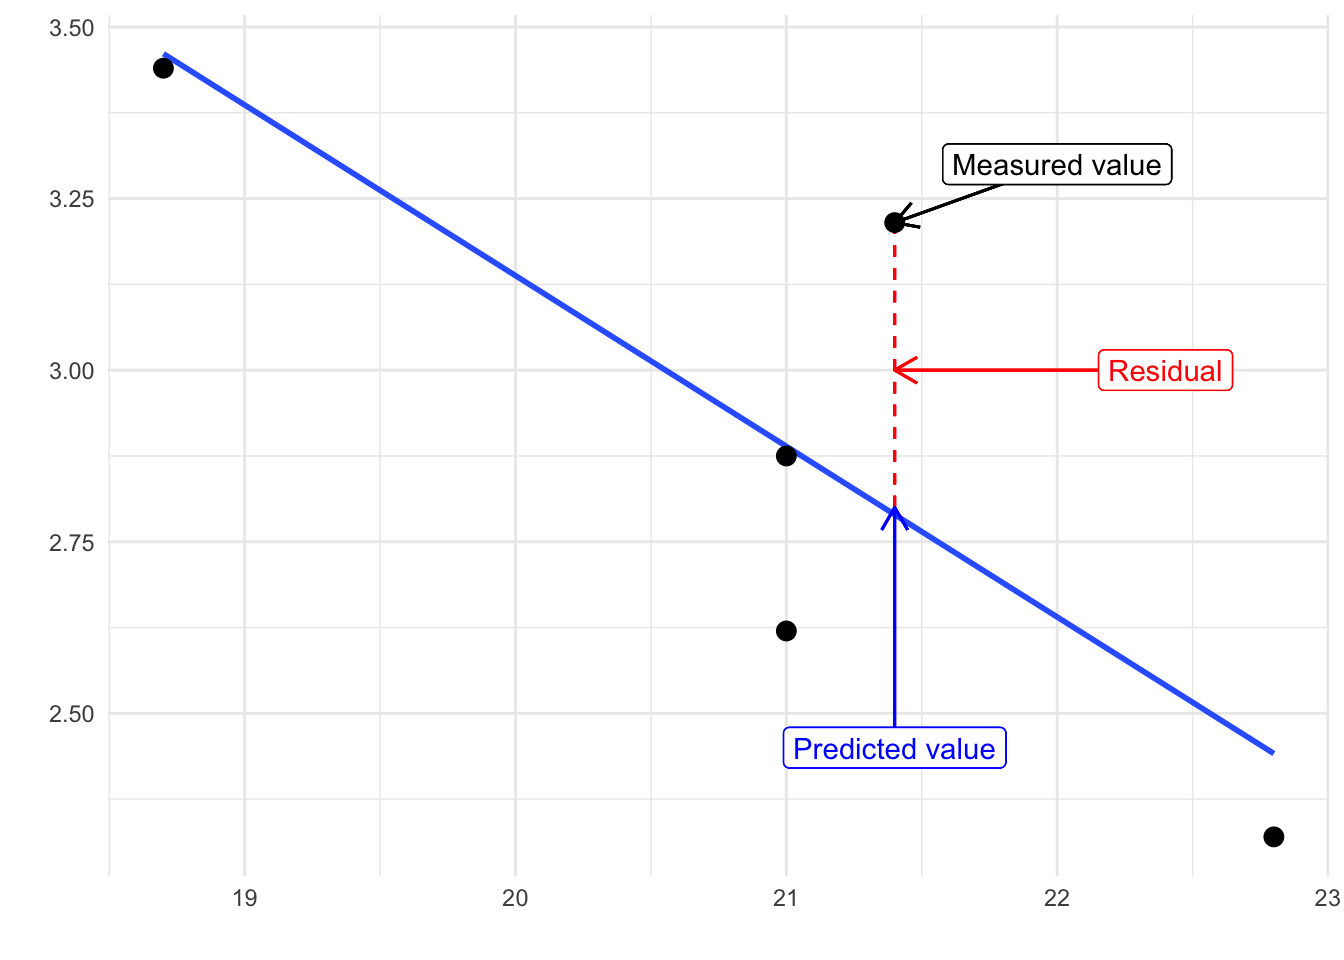 A plot of black points and a blue regression line. One point is focused on, and a rounded box with label 'Measured value' identifies it. It lies a little ways above the blue line. A red vertical dashed line segment connects it to the line, and this segment is labeled as the 'Residual'. This red dashed line hits the blue line at a point which is labeled as the 'Predicted value'.